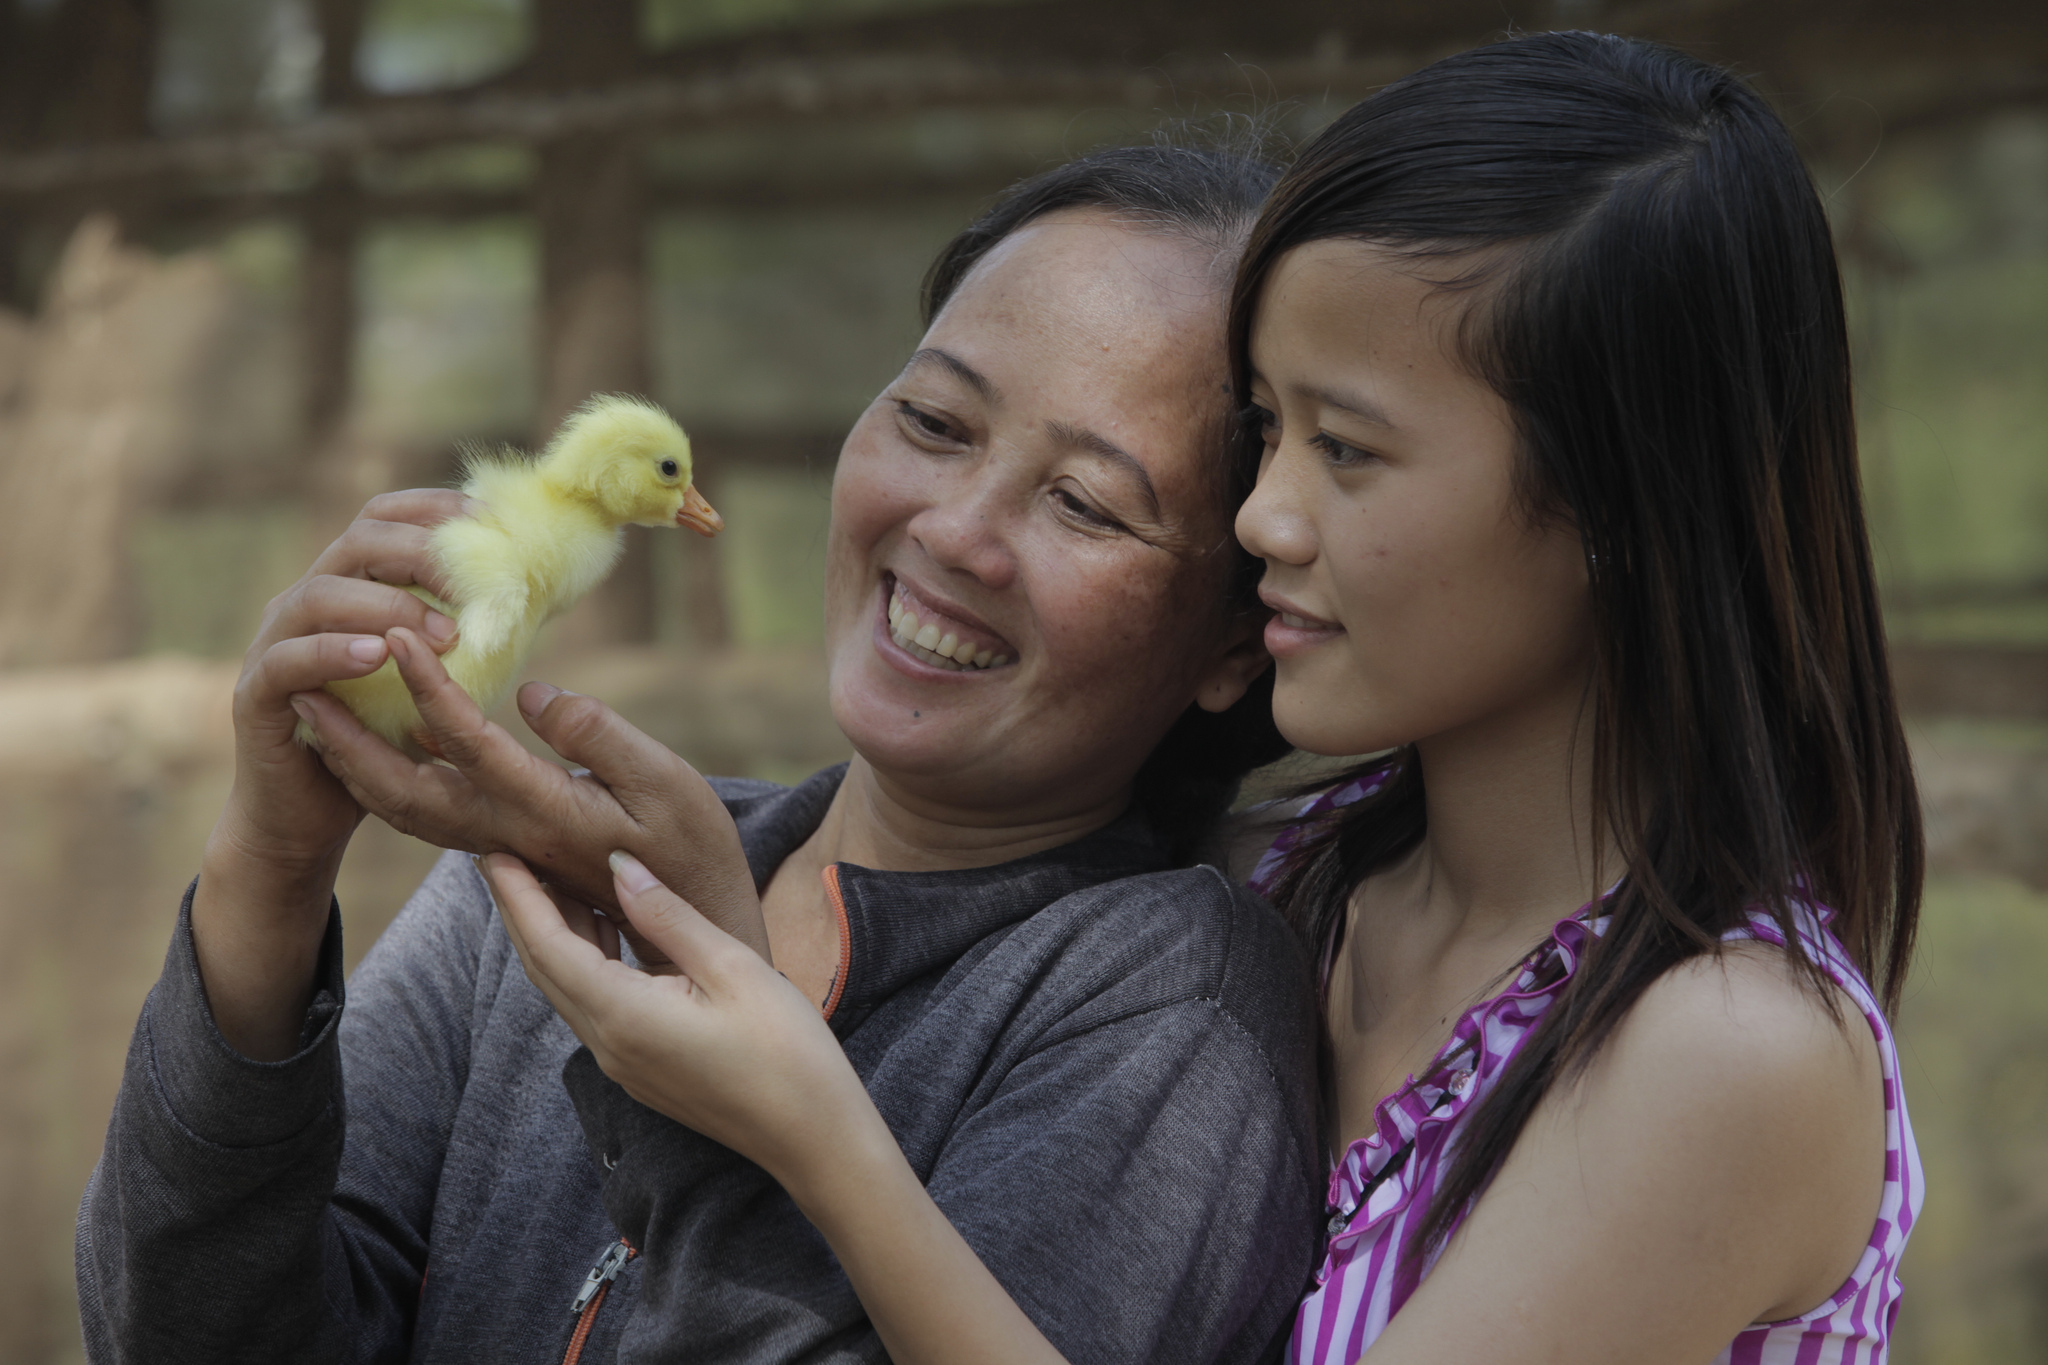 Heifer project participants in Vietnam holding a baby duck.